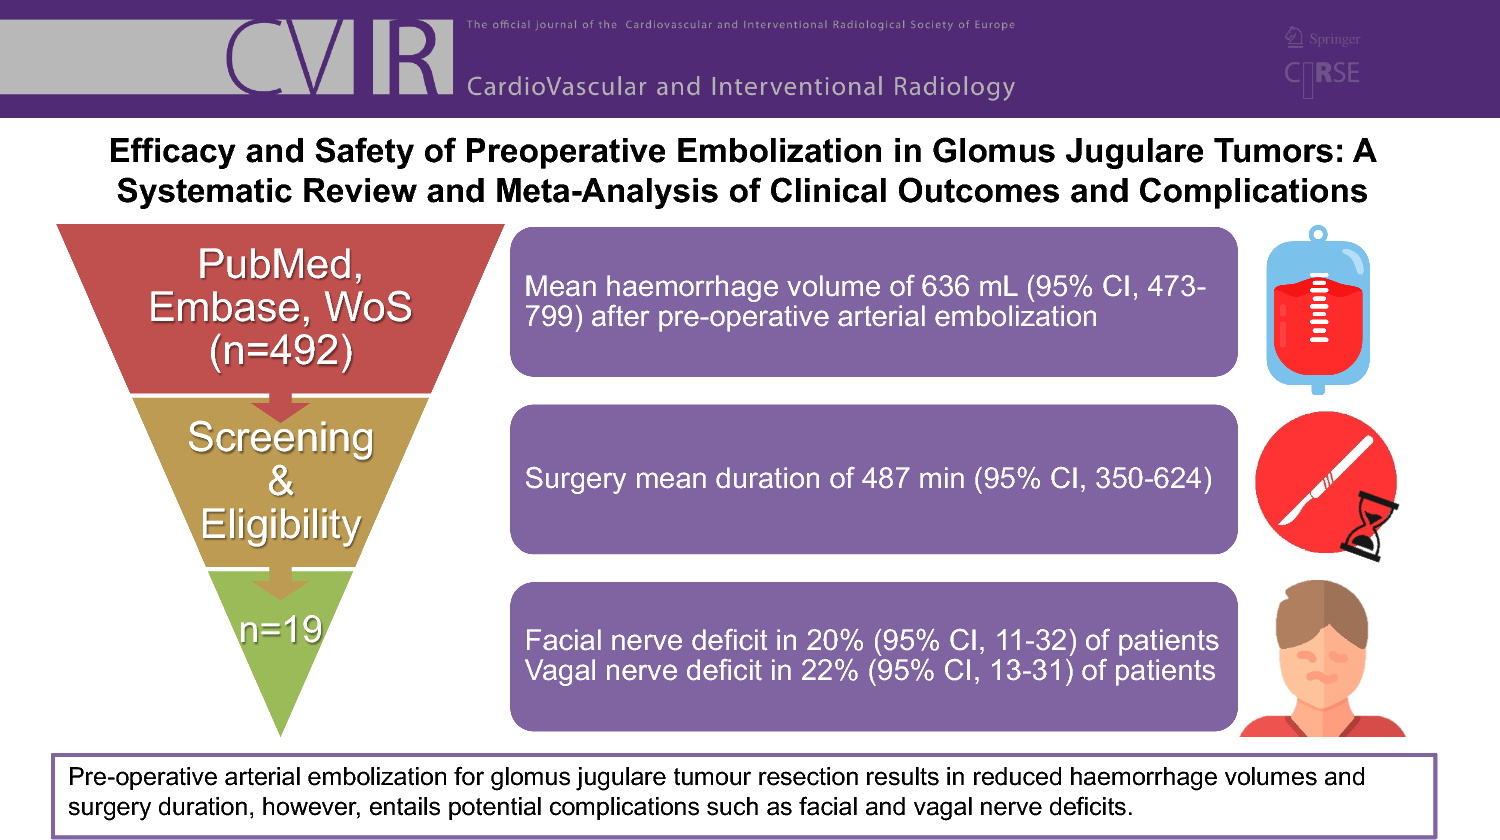 Efficacy and Safety of Preoperative Embolization in Glomus Jugulare Tumors: A Systematic Review and Meta-analysis of Clinical Outcomes and Complications